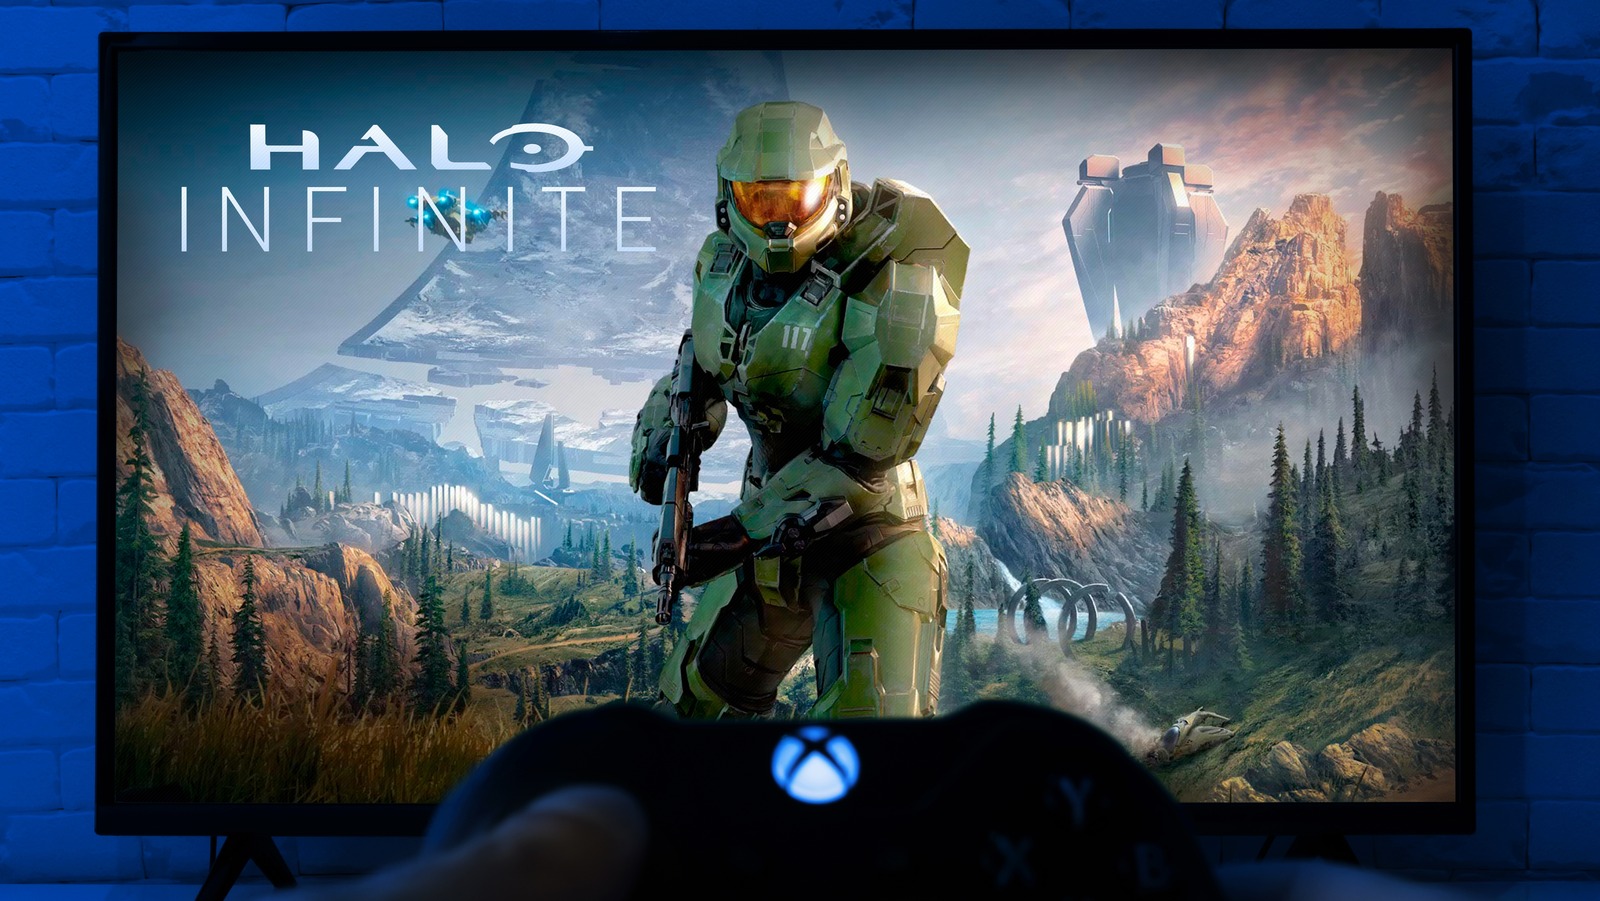 Halo Is Safe 343 Industries Insists After Microsoft Cuts Thousands Of Jobs – SlashGear